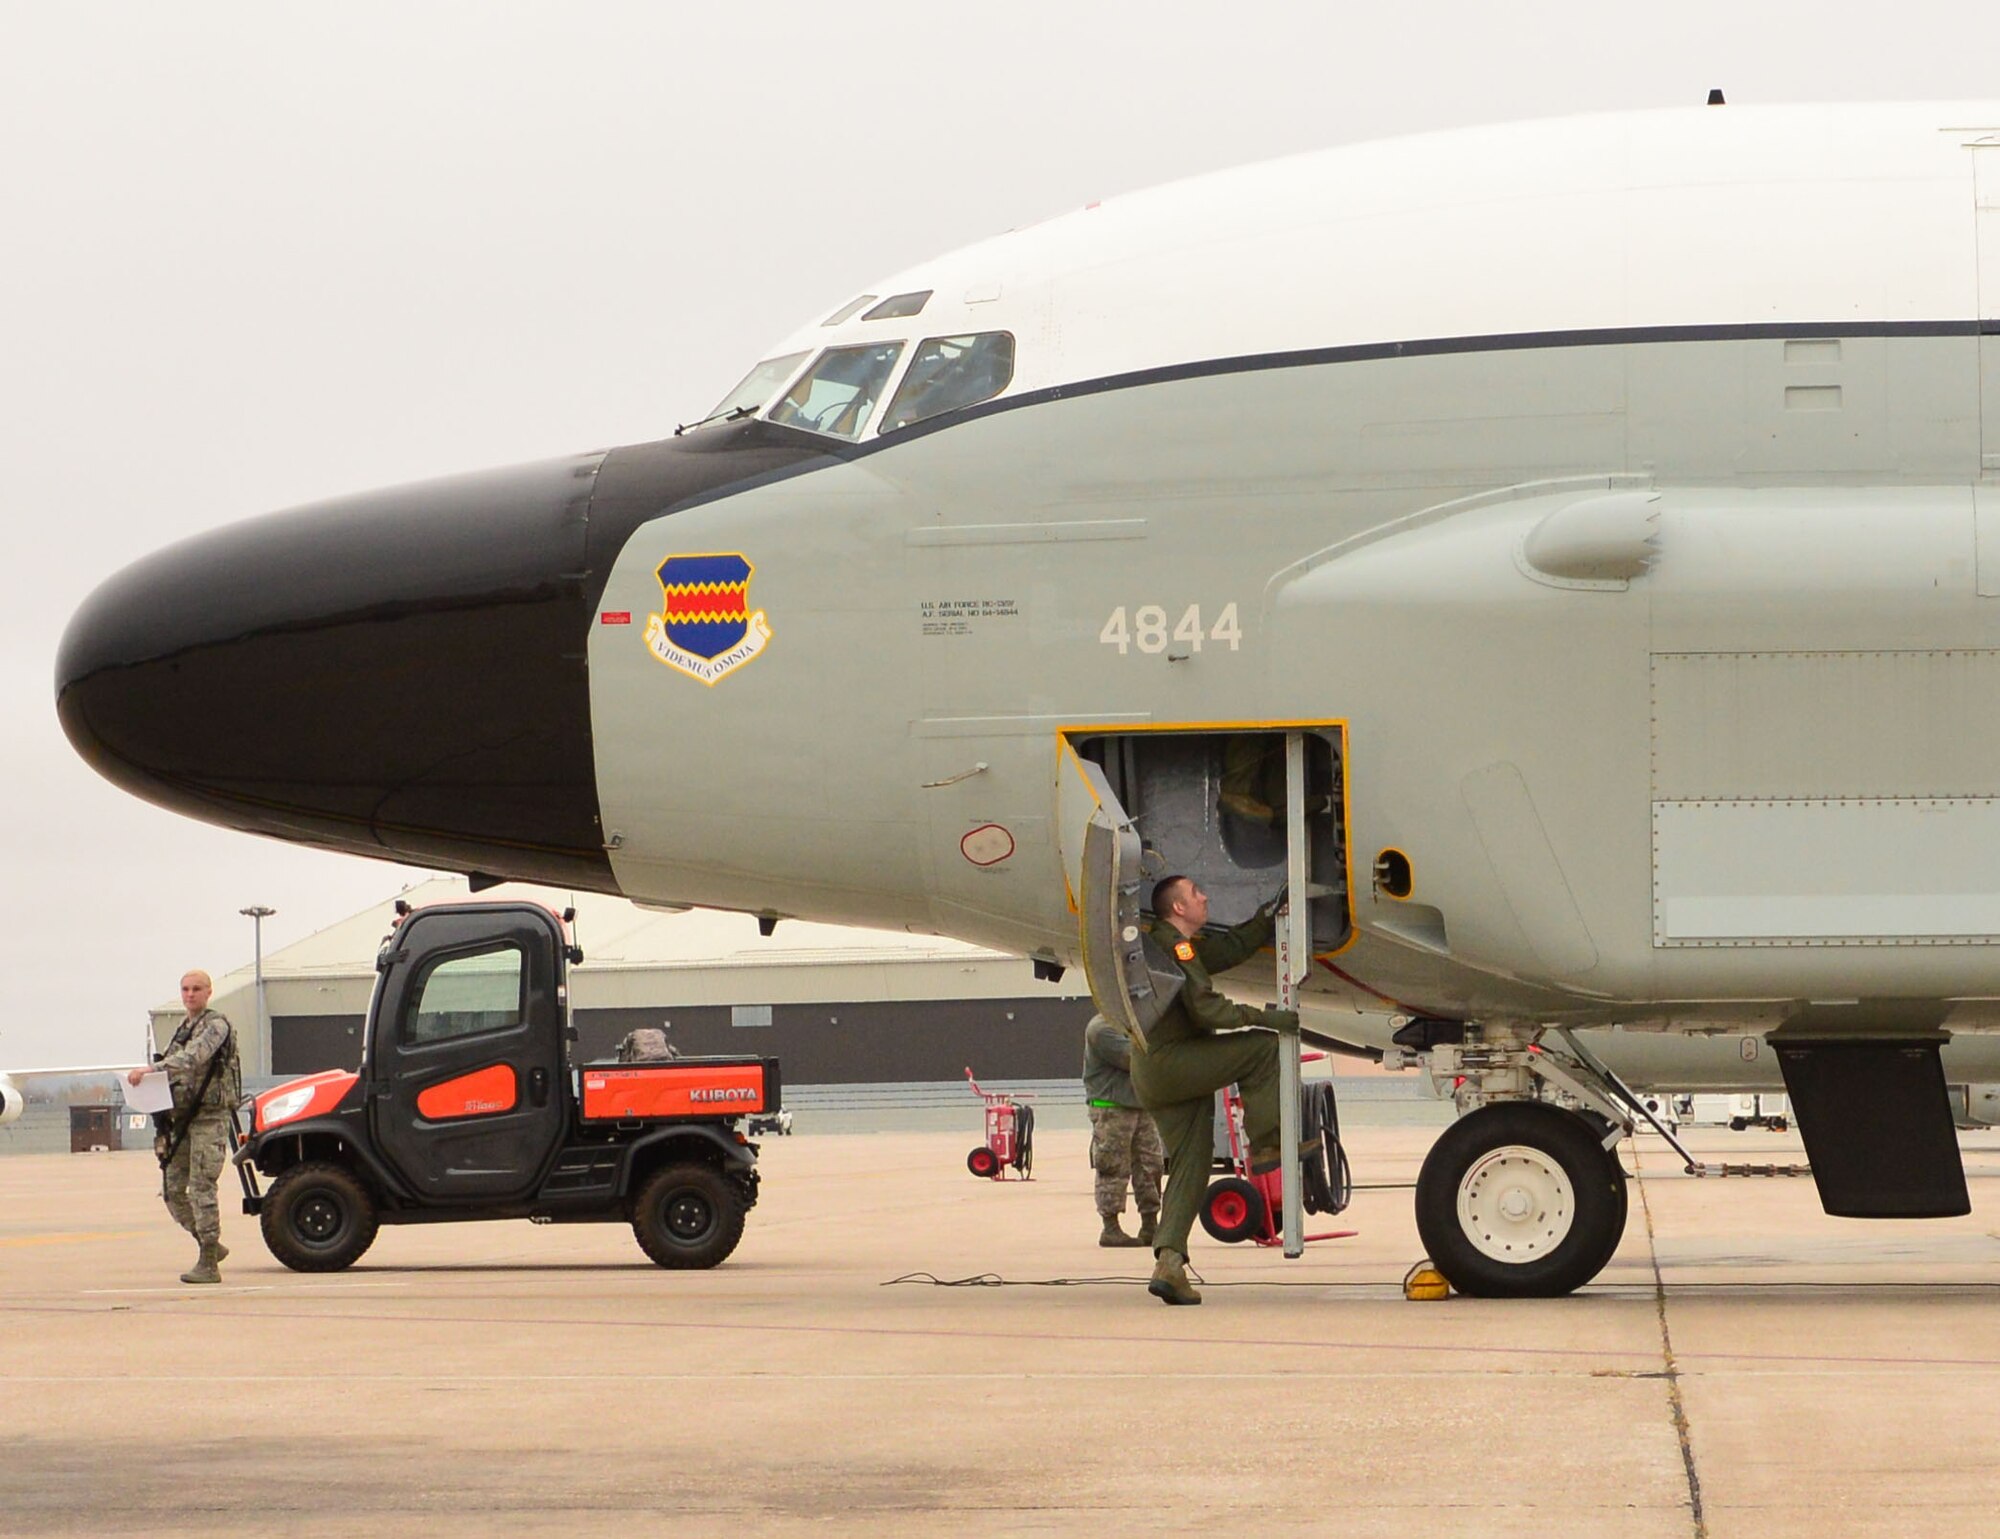 A Team Offutt Airman boards an RC-135 V/W Rivet Joint aircraft during Global Thunder 17, U.S. Strategic Command’s annual command post and field training exercise, Oct. 30, 2016, at Offutt Air Force Base, Neb. The exercise provided training opportunities for USSTRATCOM-tasked components, task forces, units and command posts to deter and, if necessary, defeat a military attack against the United States and to employ forces as directed by the President. (U.S. Air Force Photo by Drew Nystrom)